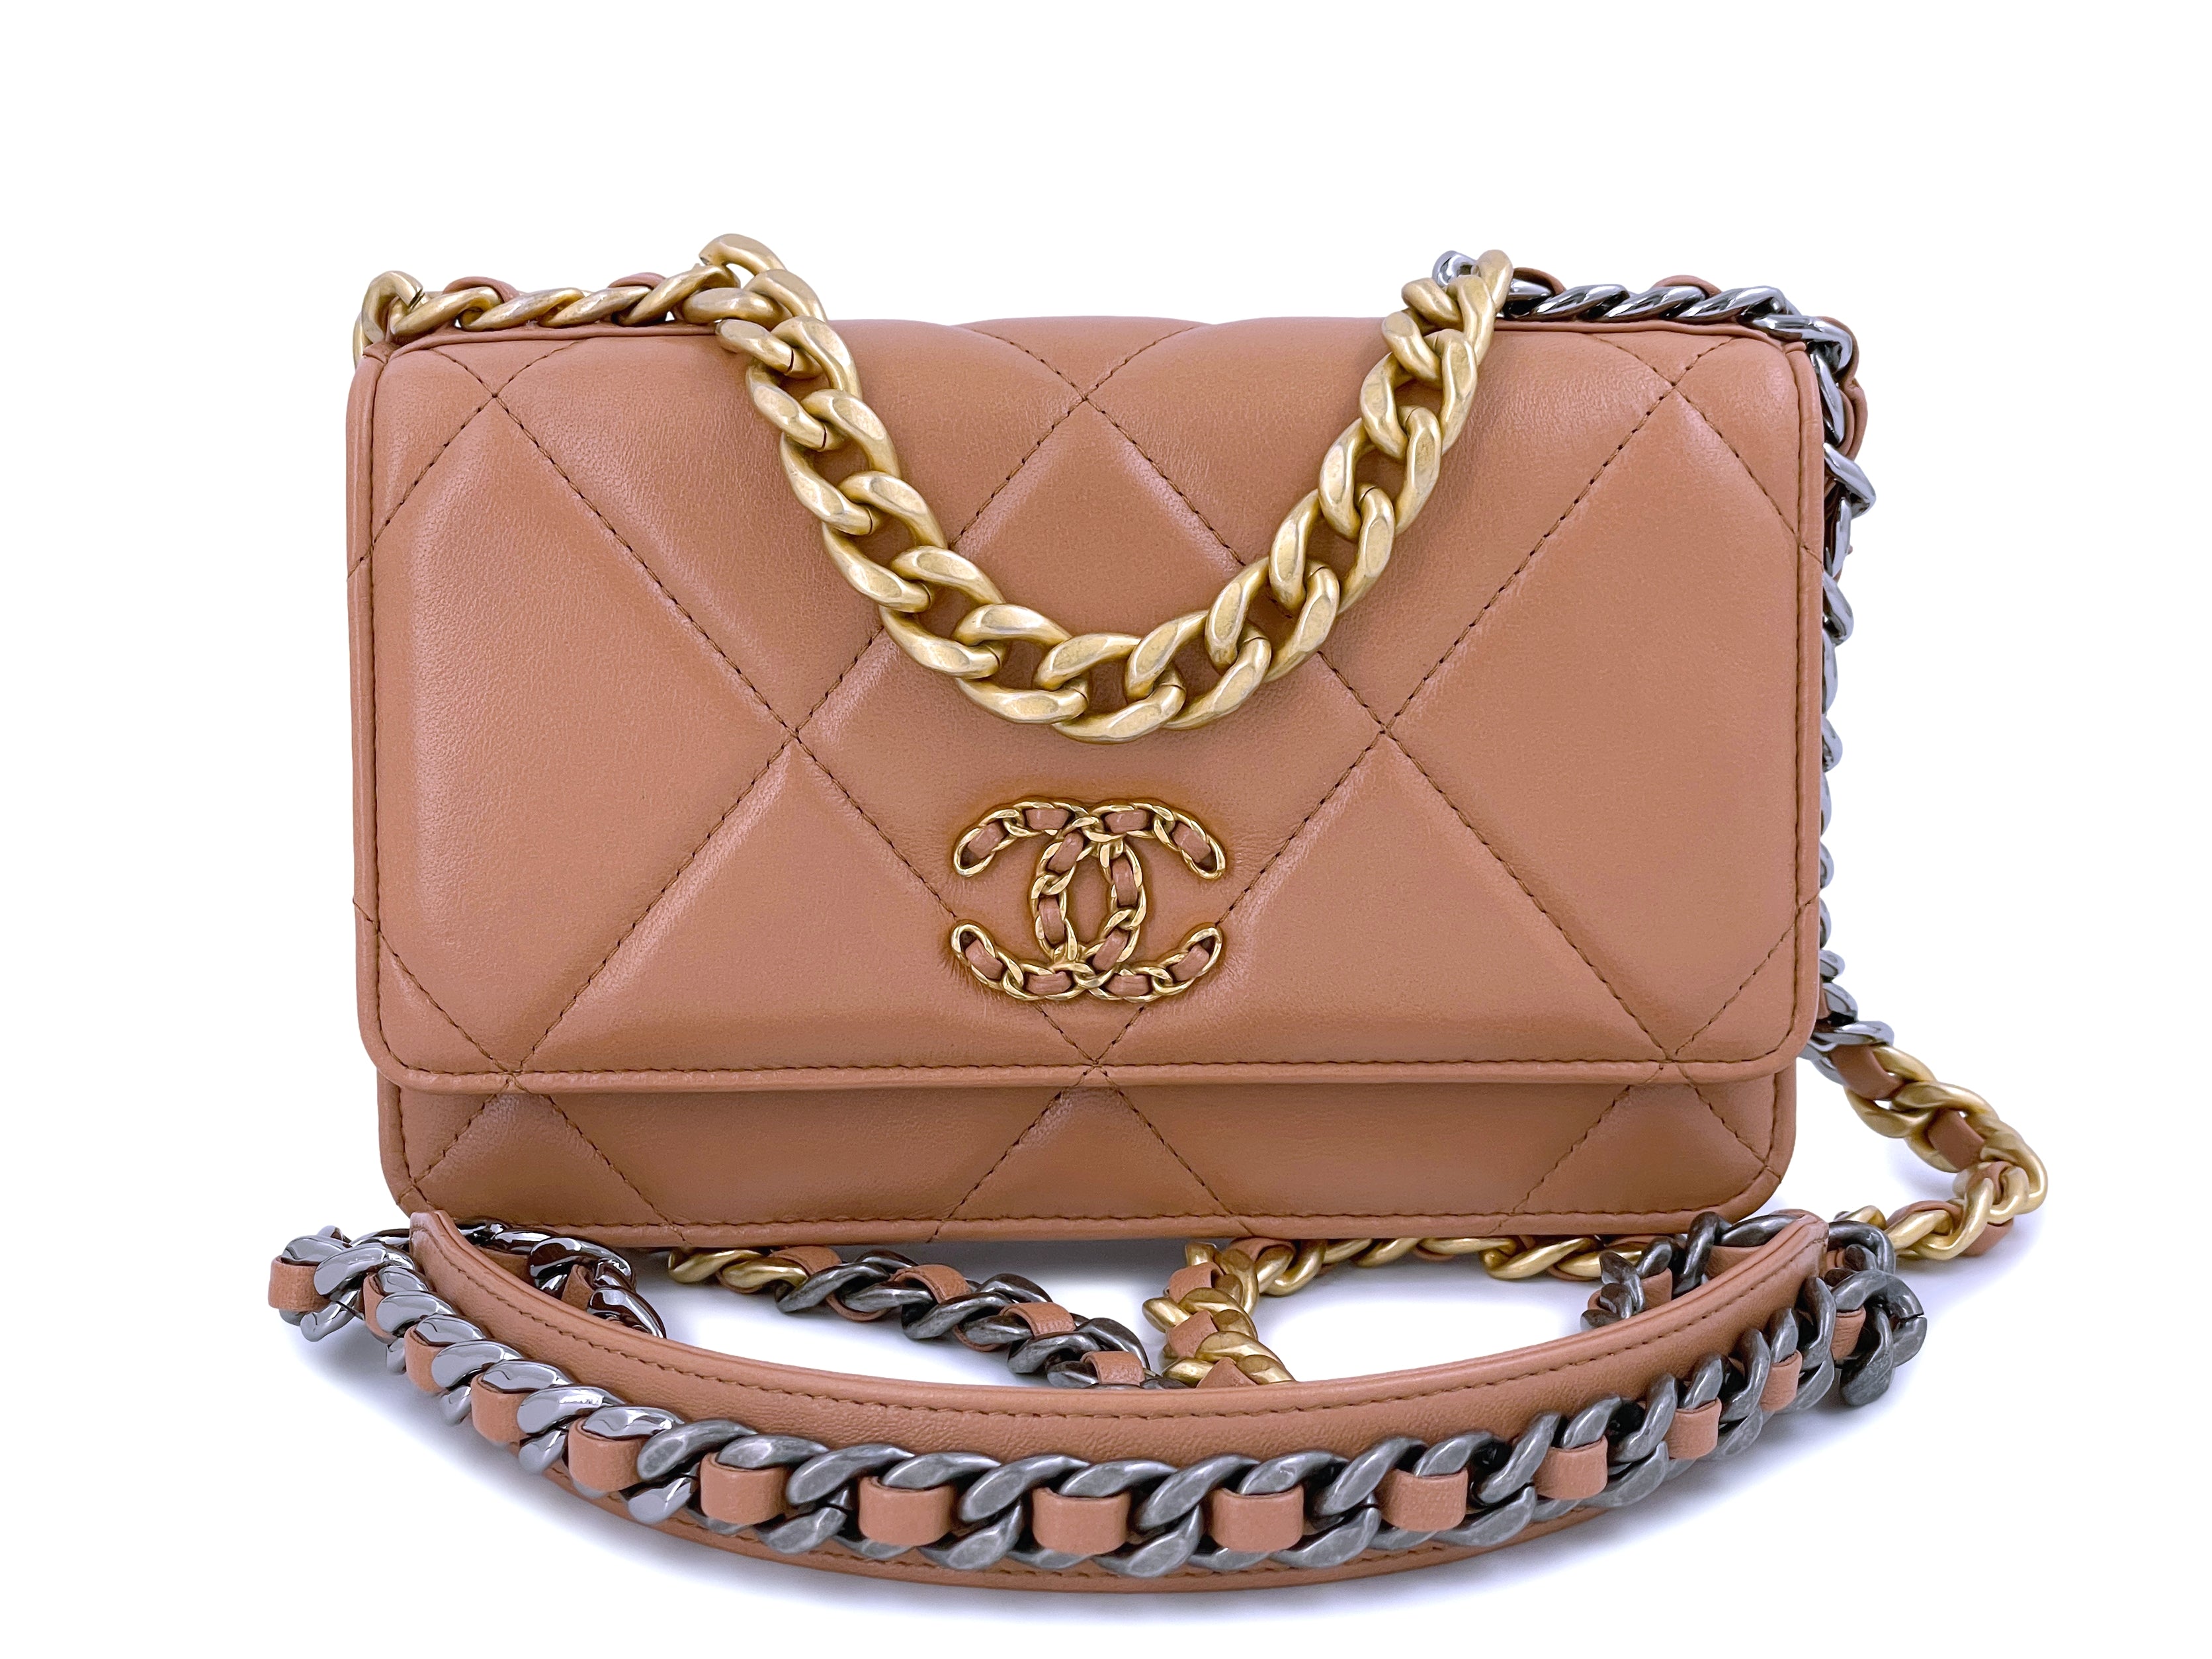 Wallet on chain chanel 19 leather handbag Chanel Camel in Leather